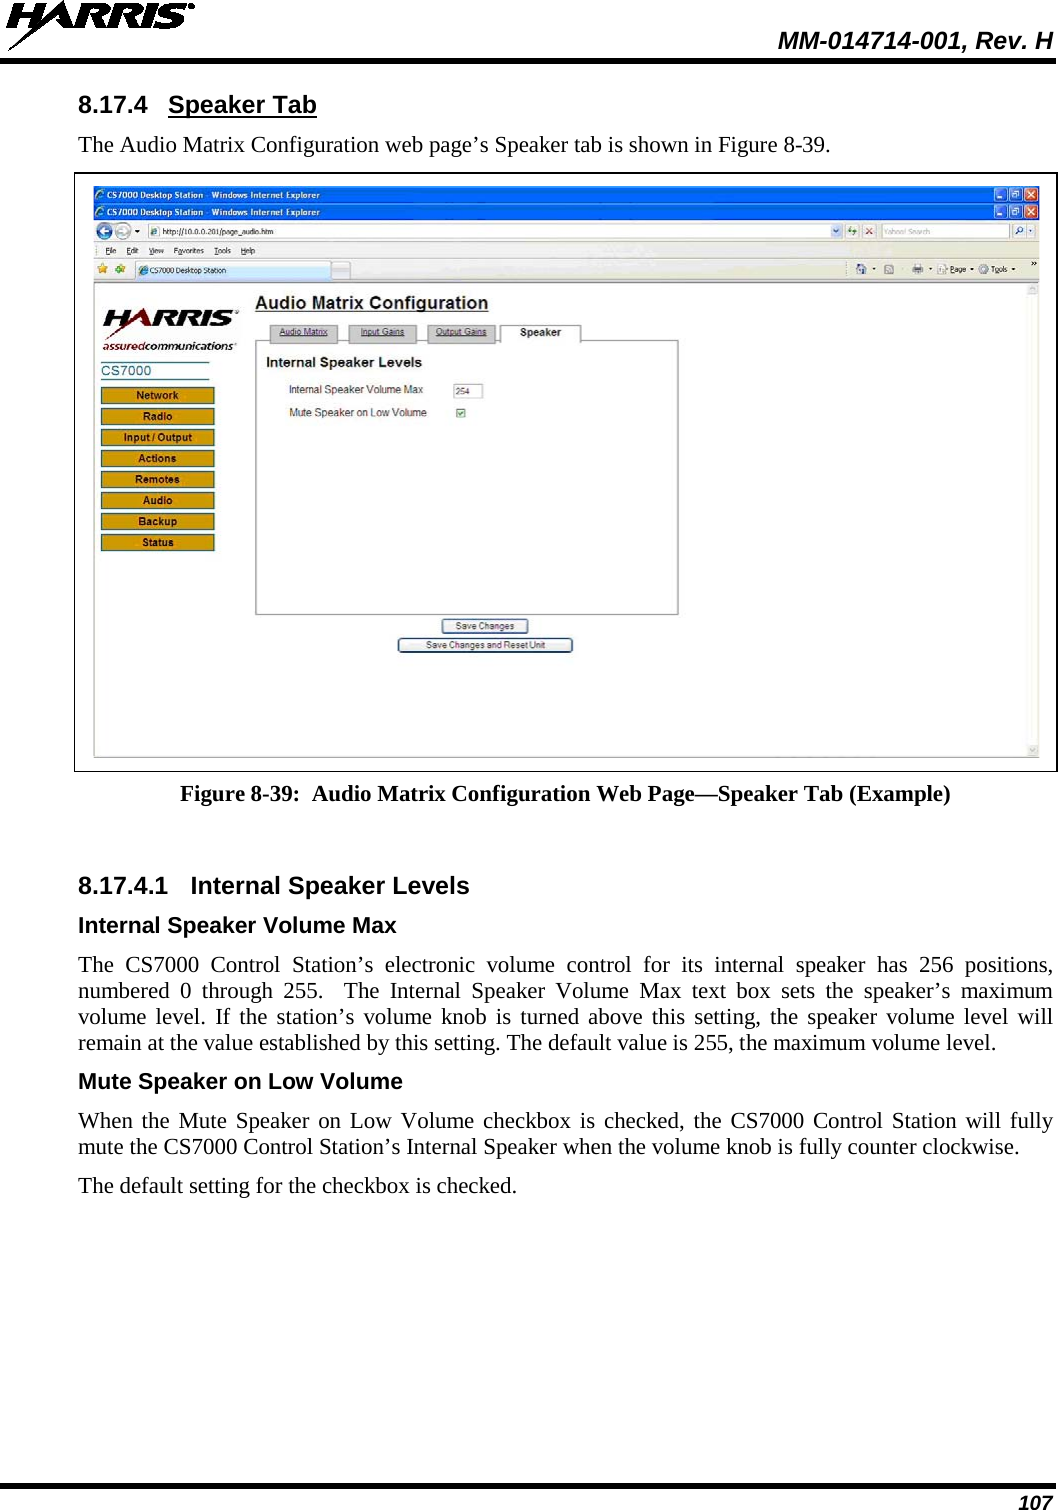  MM-014714-001, Rev. H 107 8.17.4 Speaker Tab The Audio Matrix Configuration web page’s Speaker tab is shown in Figure 8-39.   Figure 8-39:  Audio Matrix Configuration Web Page—Speaker Tab (Example)  8.17.4.1 Internal Speaker Levels Internal Speaker Volume Max The CS7000 Control Station’s electronic volume control for its internal speaker has 256 positions, numbered  0 through 255.  The Internal Speaker Volume Max text box sets the speaker’s maximum volume level. If the station’s volume knob is turned above this setting, the speaker volume level will remain at the value established by this setting. The default value is 255, the maximum volume level. Mute Speaker on Low Volume When the Mute Speaker on Low Volume checkbox is checked, the CS7000 Control Station will fully mute the CS7000 Control Station’s Internal Speaker when the volume knob is fully counter clockwise. The default setting for the checkbox is checked. 